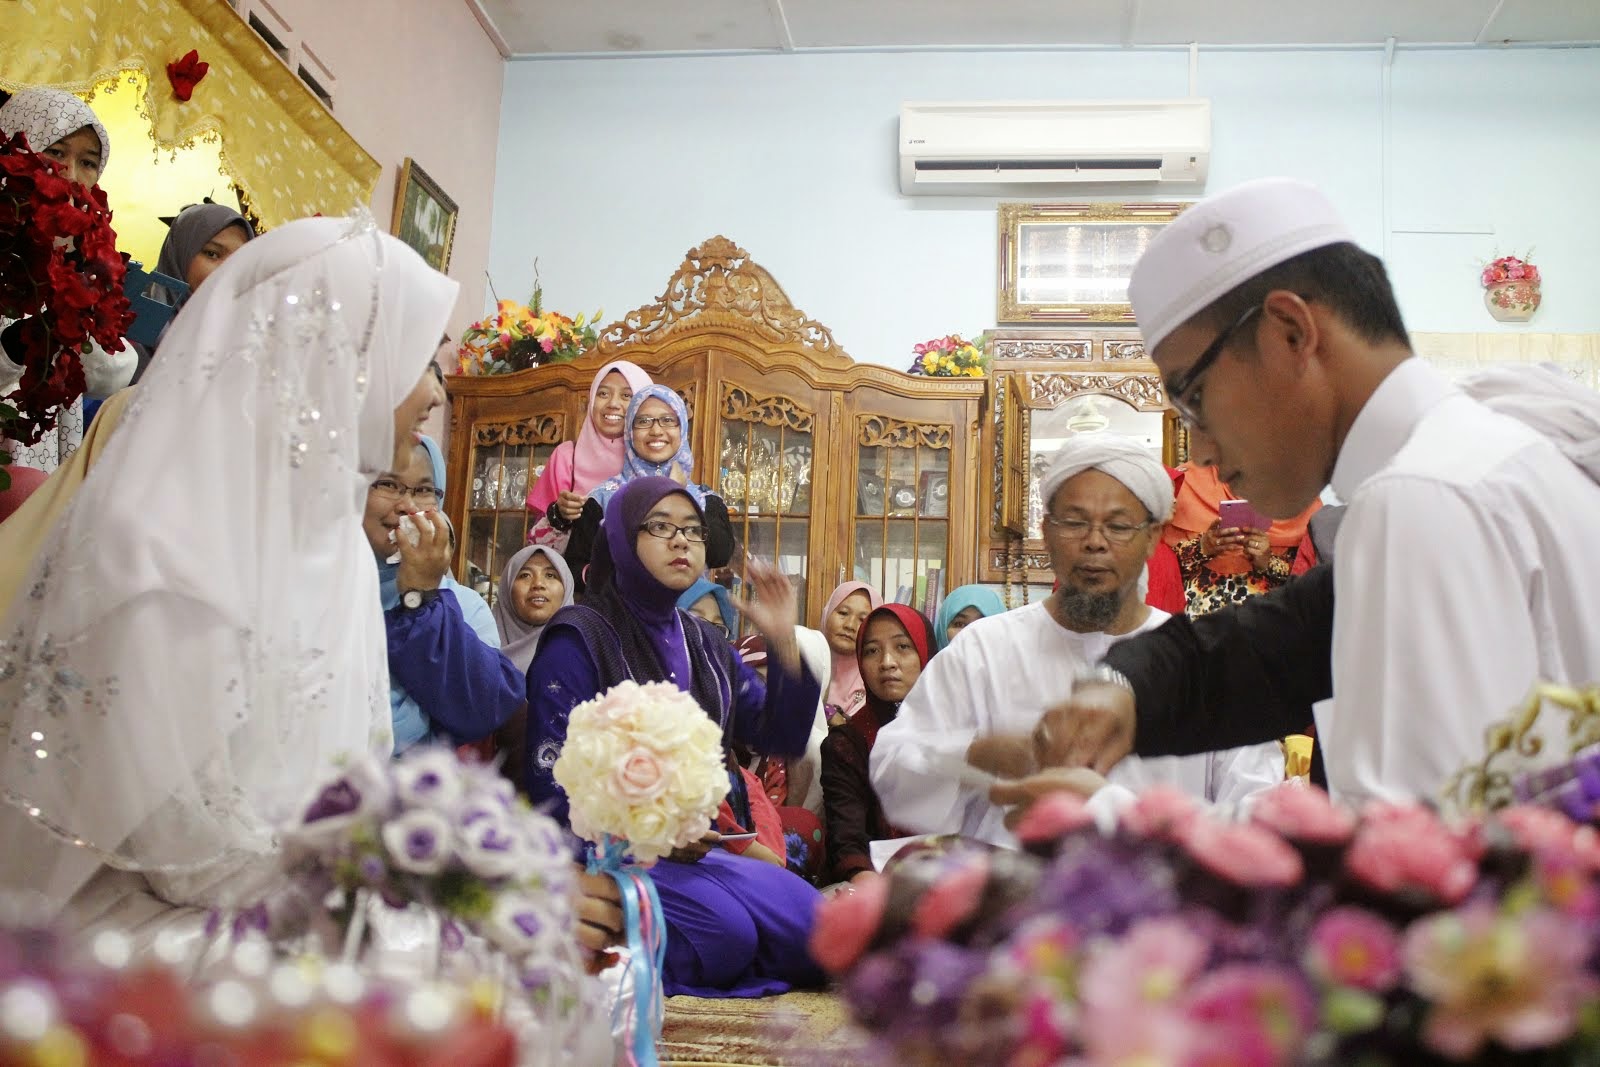 OUR NIKAH DAY (07.06.2014)